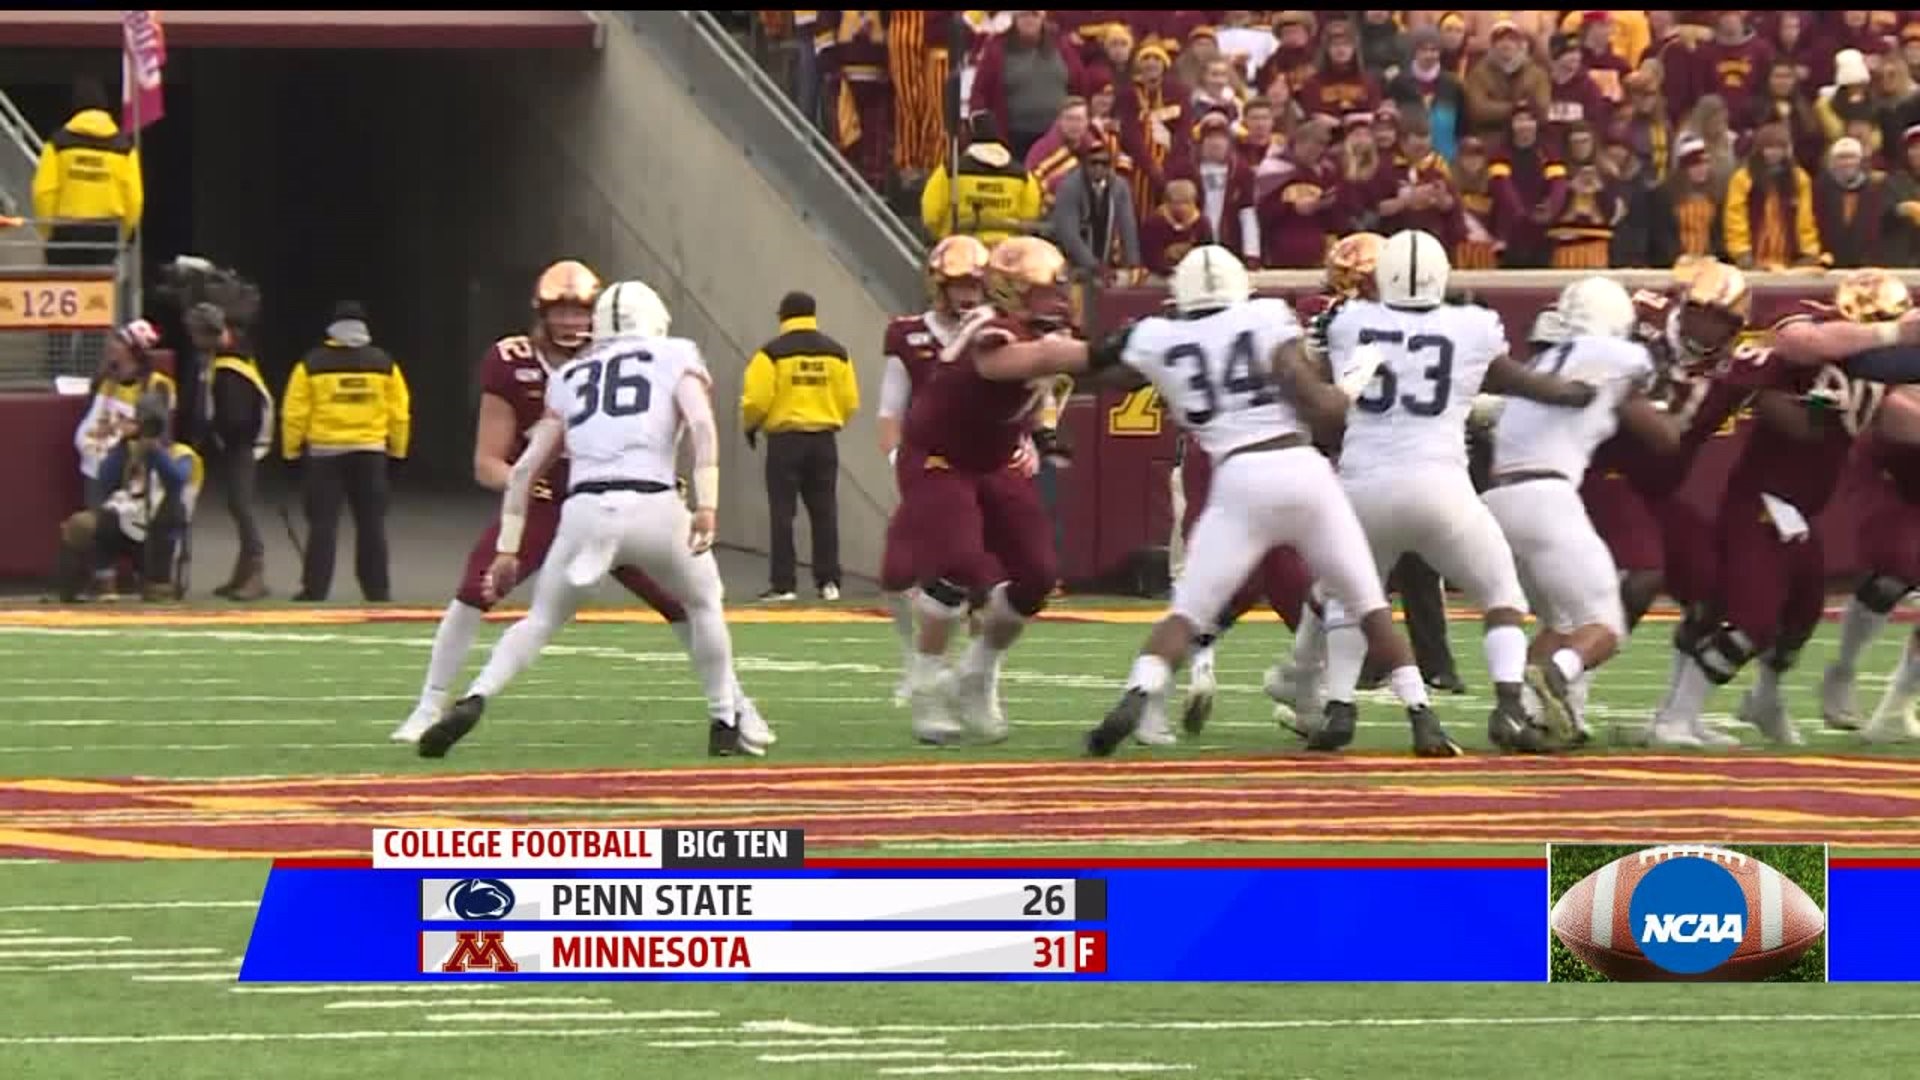 Gophers upend Nittany Lions, 31-26